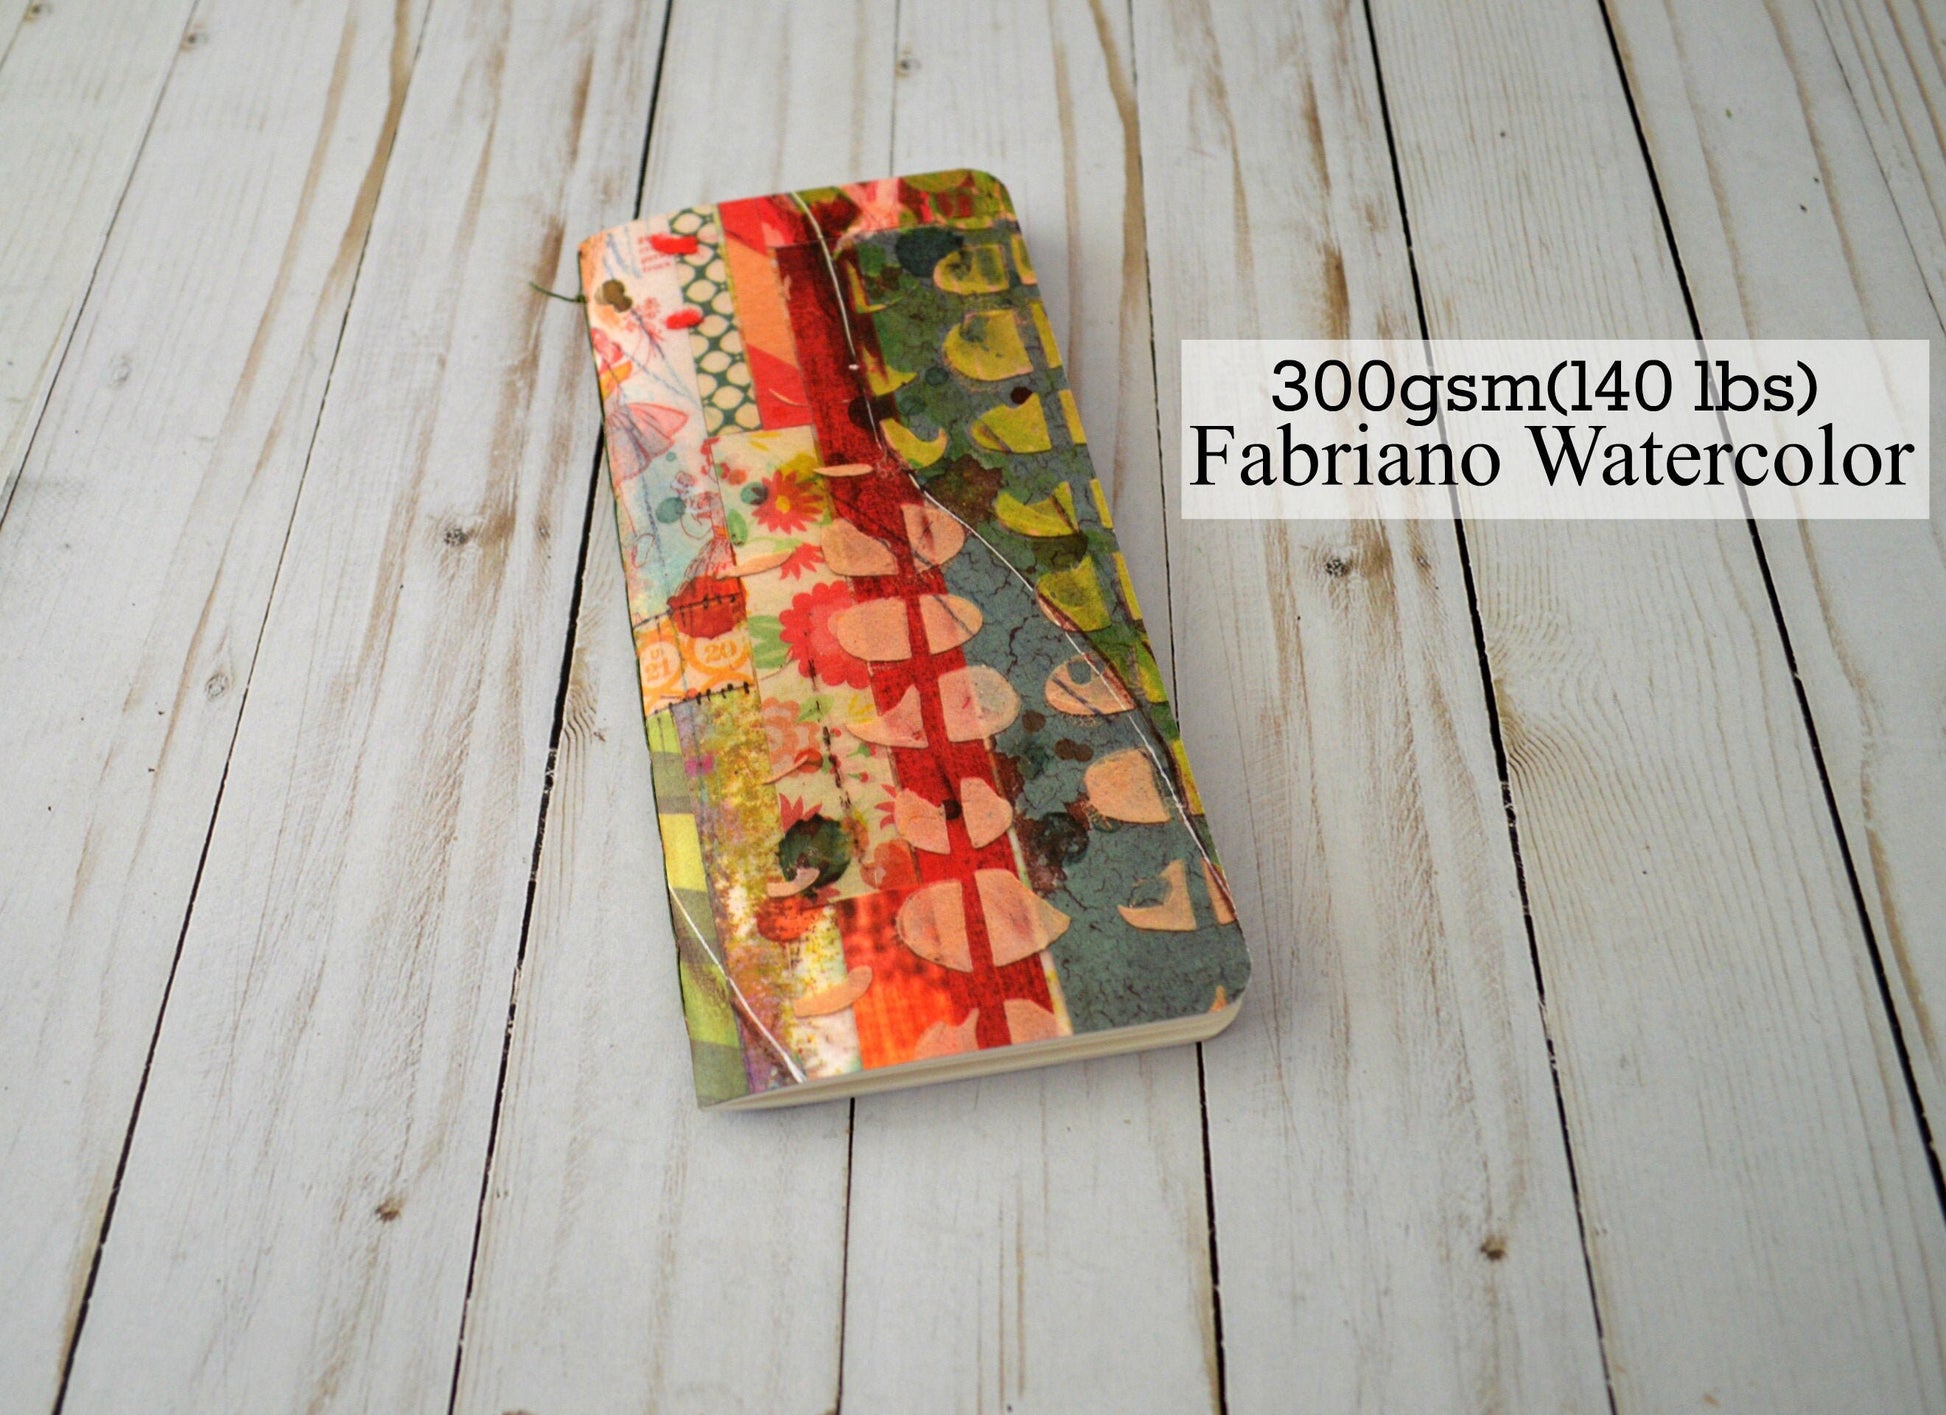 Watercolor Pocket Sketchbook Journal with 300gsm Fabriano paper